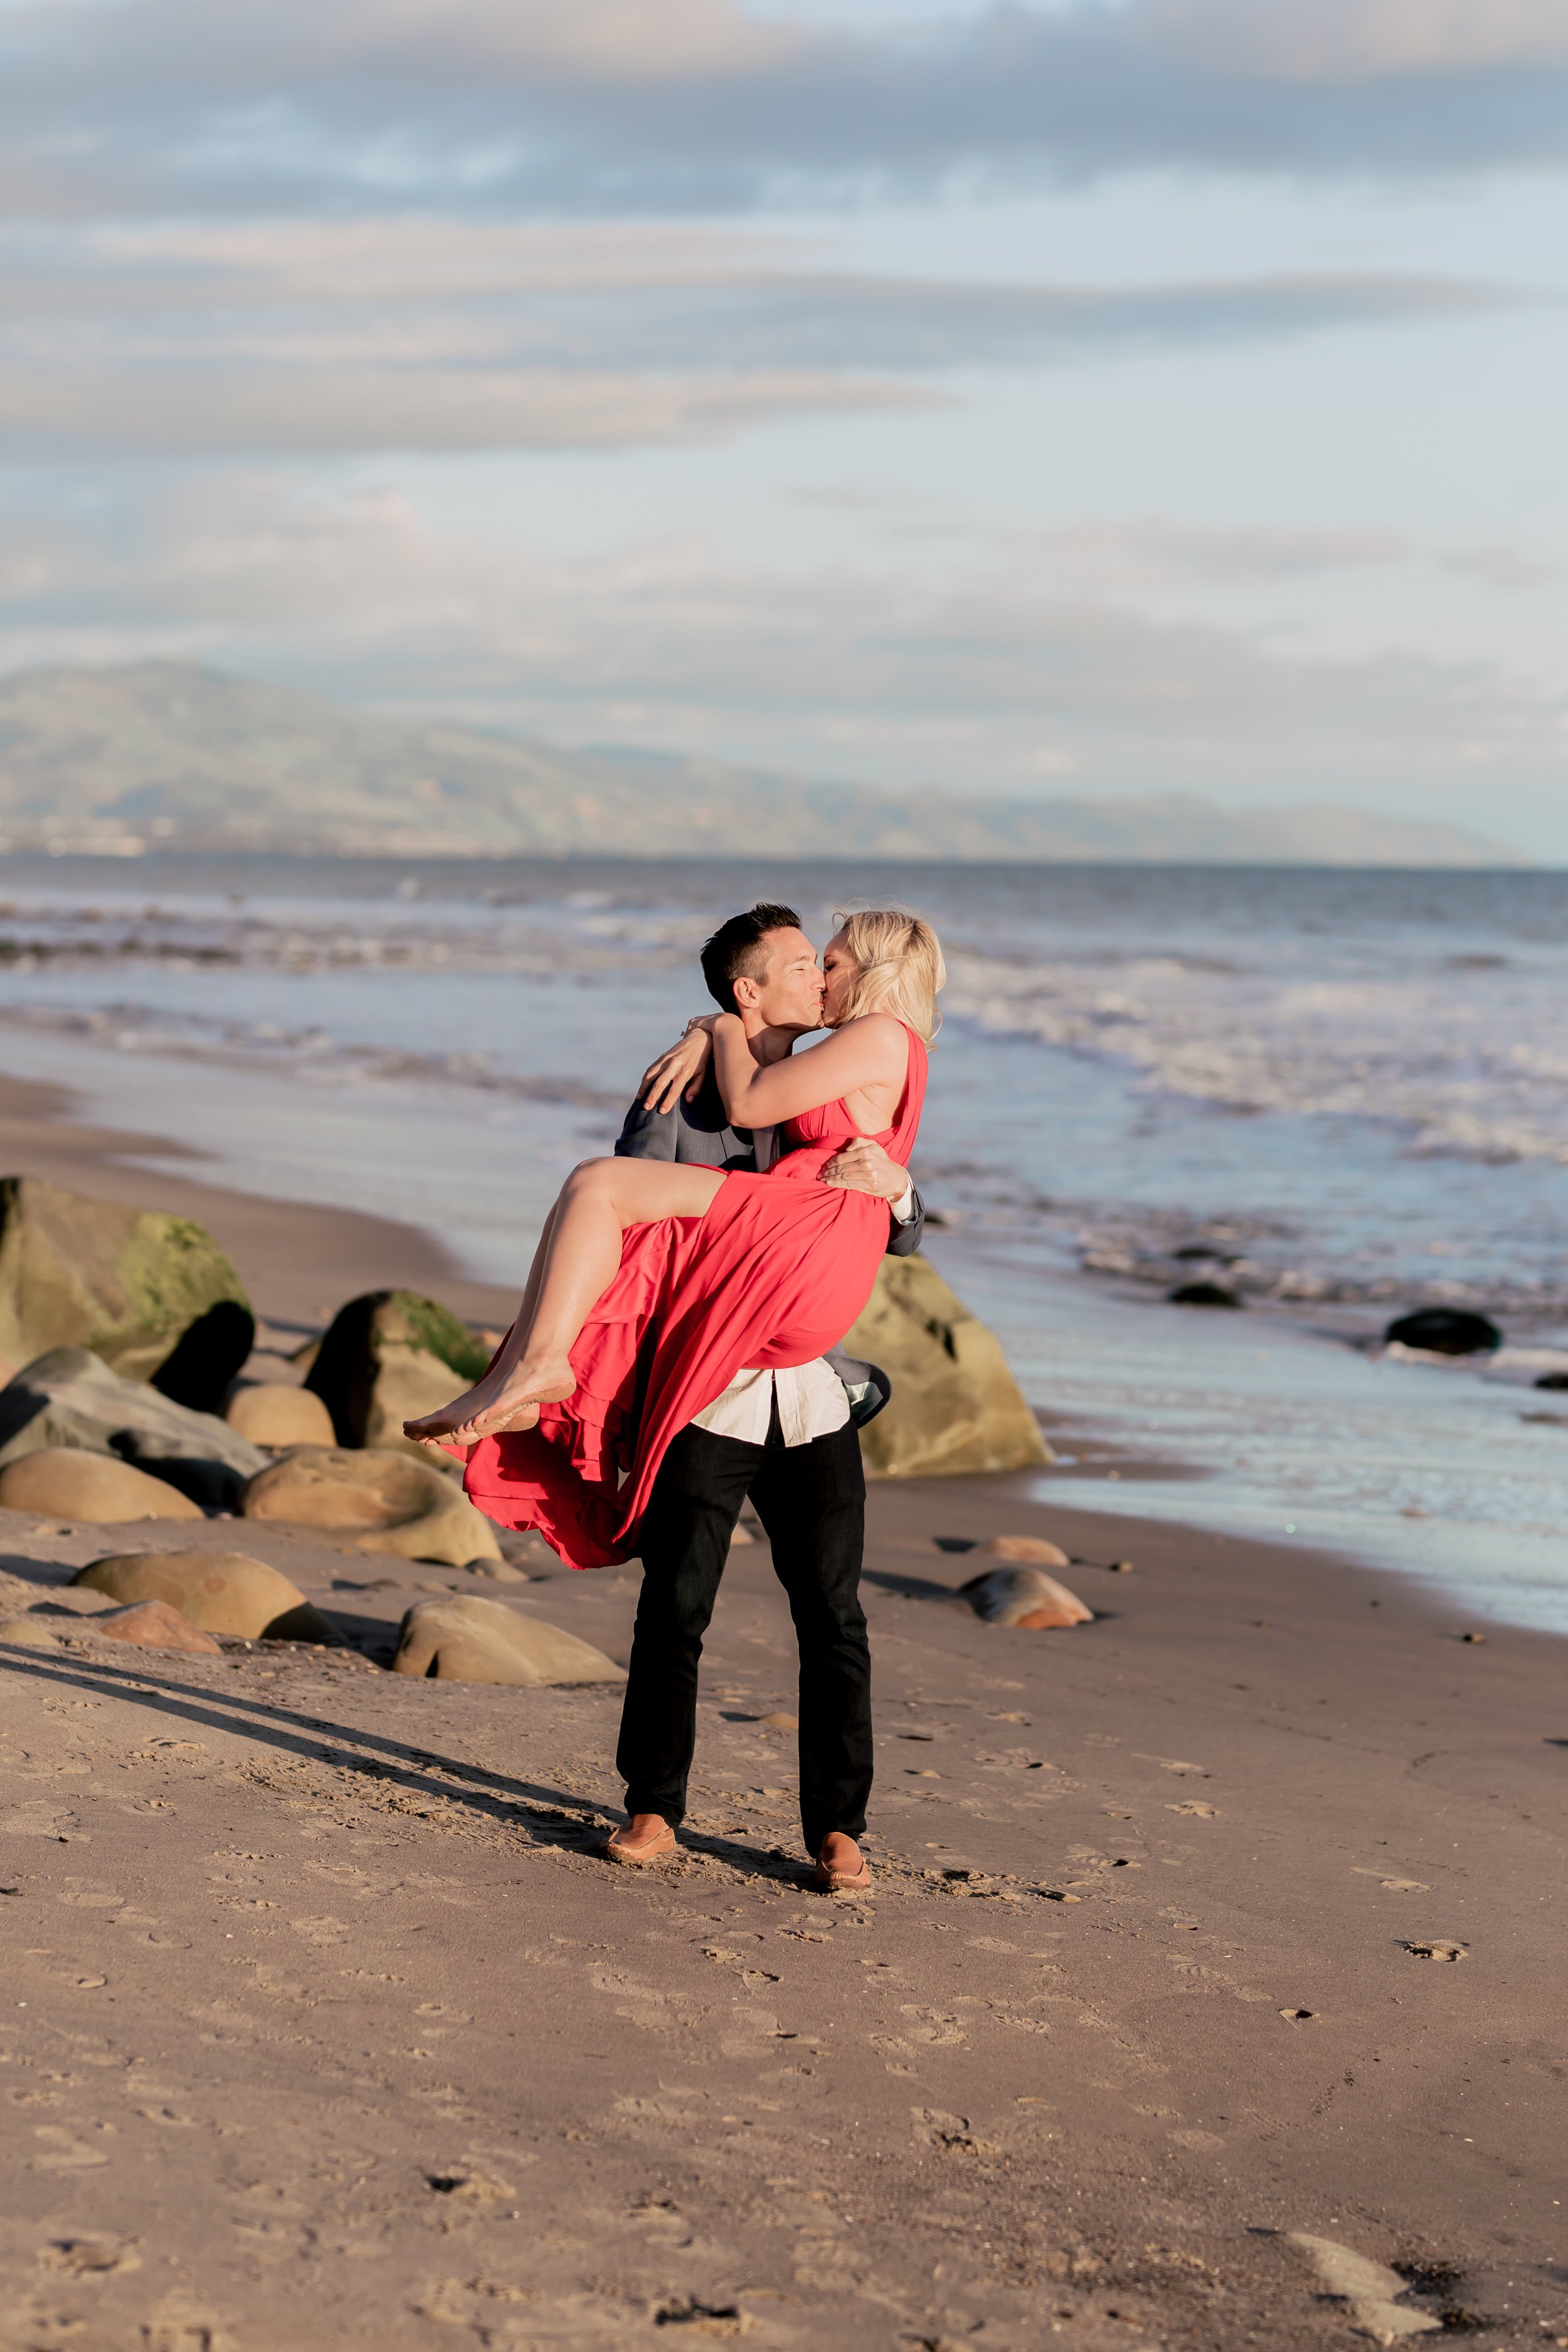 santabarbarawedding.com | Rewind Photography | Butterfly Beach | Engaged Couple on Beach at Sunset